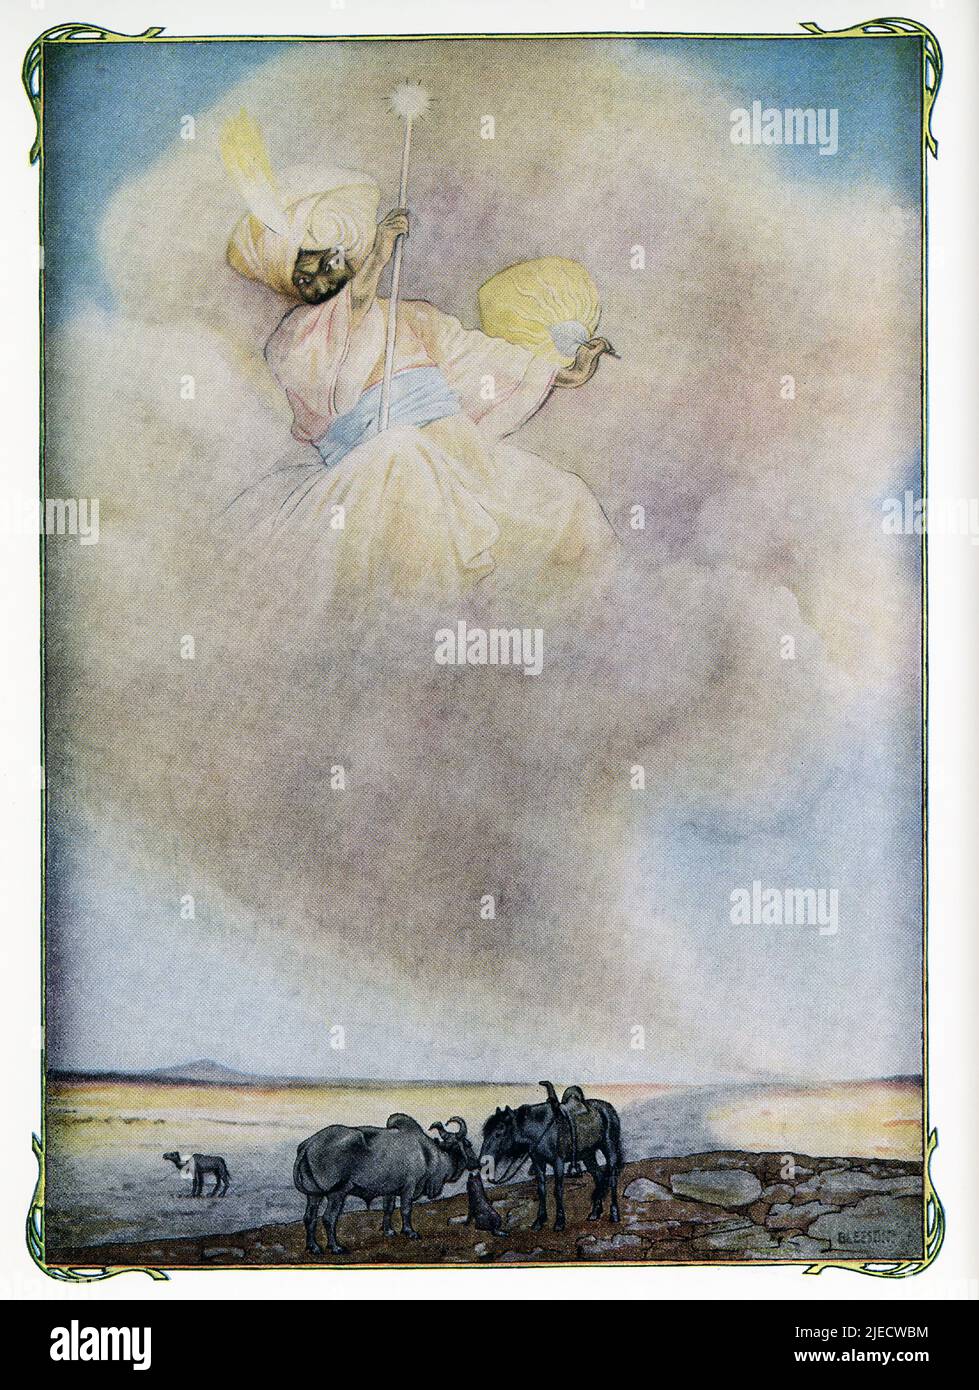 This 1912 image by J M Gleeson illustrates Kipling’s How the Camel Got Its Lump tale: When the animals began to work for Man, the Camel lived in a desert because he was idle and refused to help. The Dog, the Horse and the Ox all urged him to join in their work, but he only answered “Humph!” They complained to the Man, who said he was sorry, but they would just have to work longer hours themselves. Then they complained to the Djinn in charge of All Deserts. So the Djinn went to see the Camel and told him to work, but still all he would say was “Humph!” The Djinn made a magic that puffed up the Stock Photo